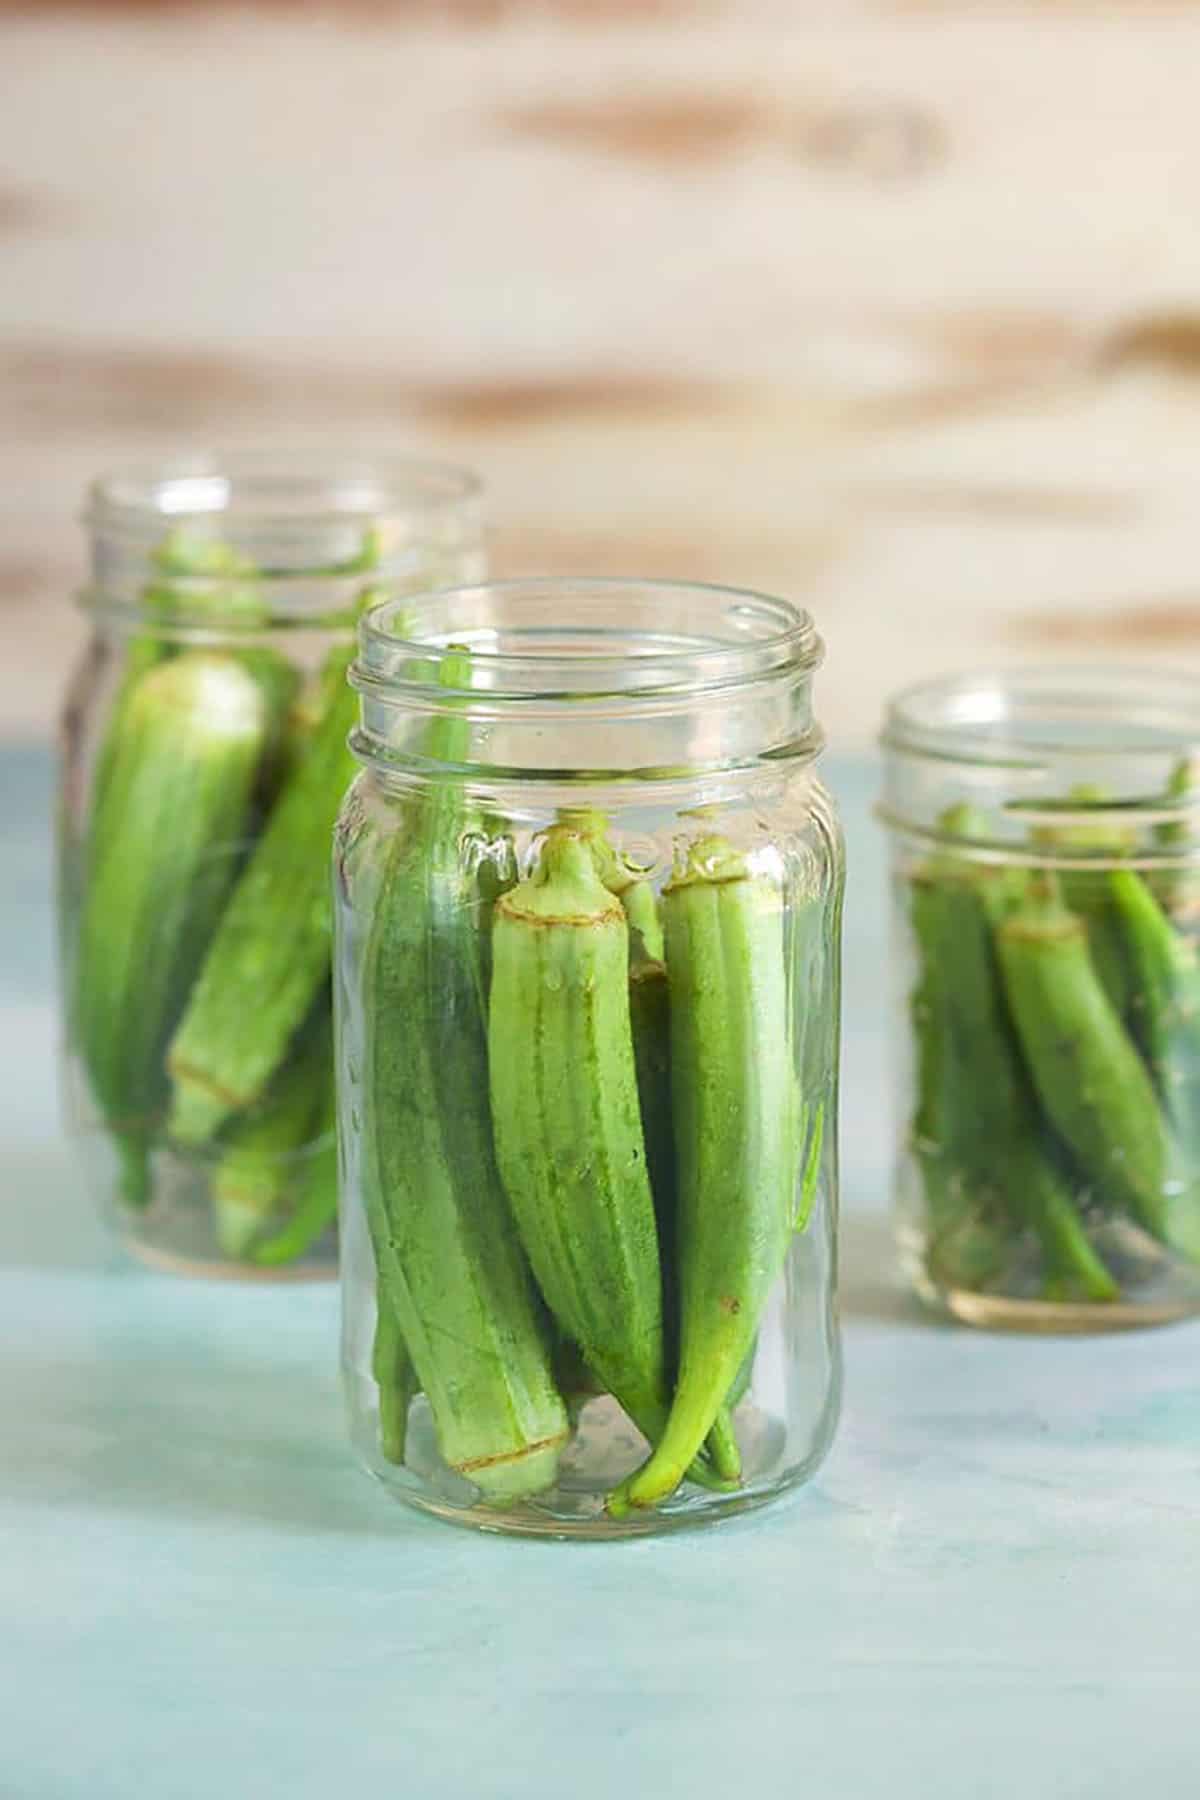 Okra in canning jars on a blue background.